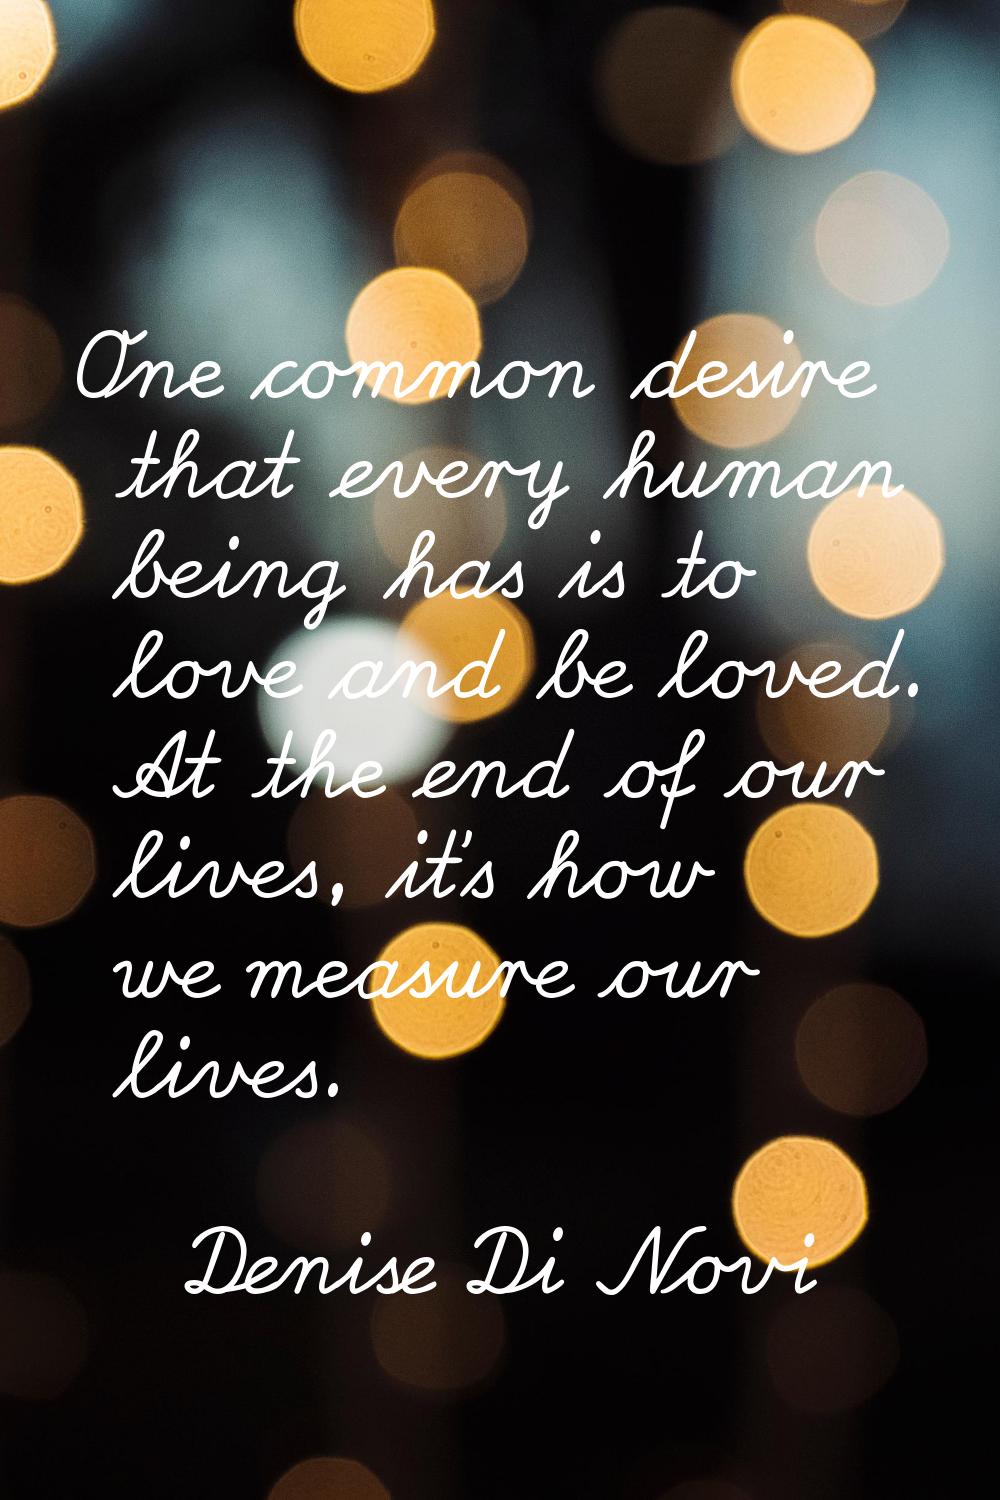 One common desire that every human being has is to love and be loved. At the end of our lives, it's